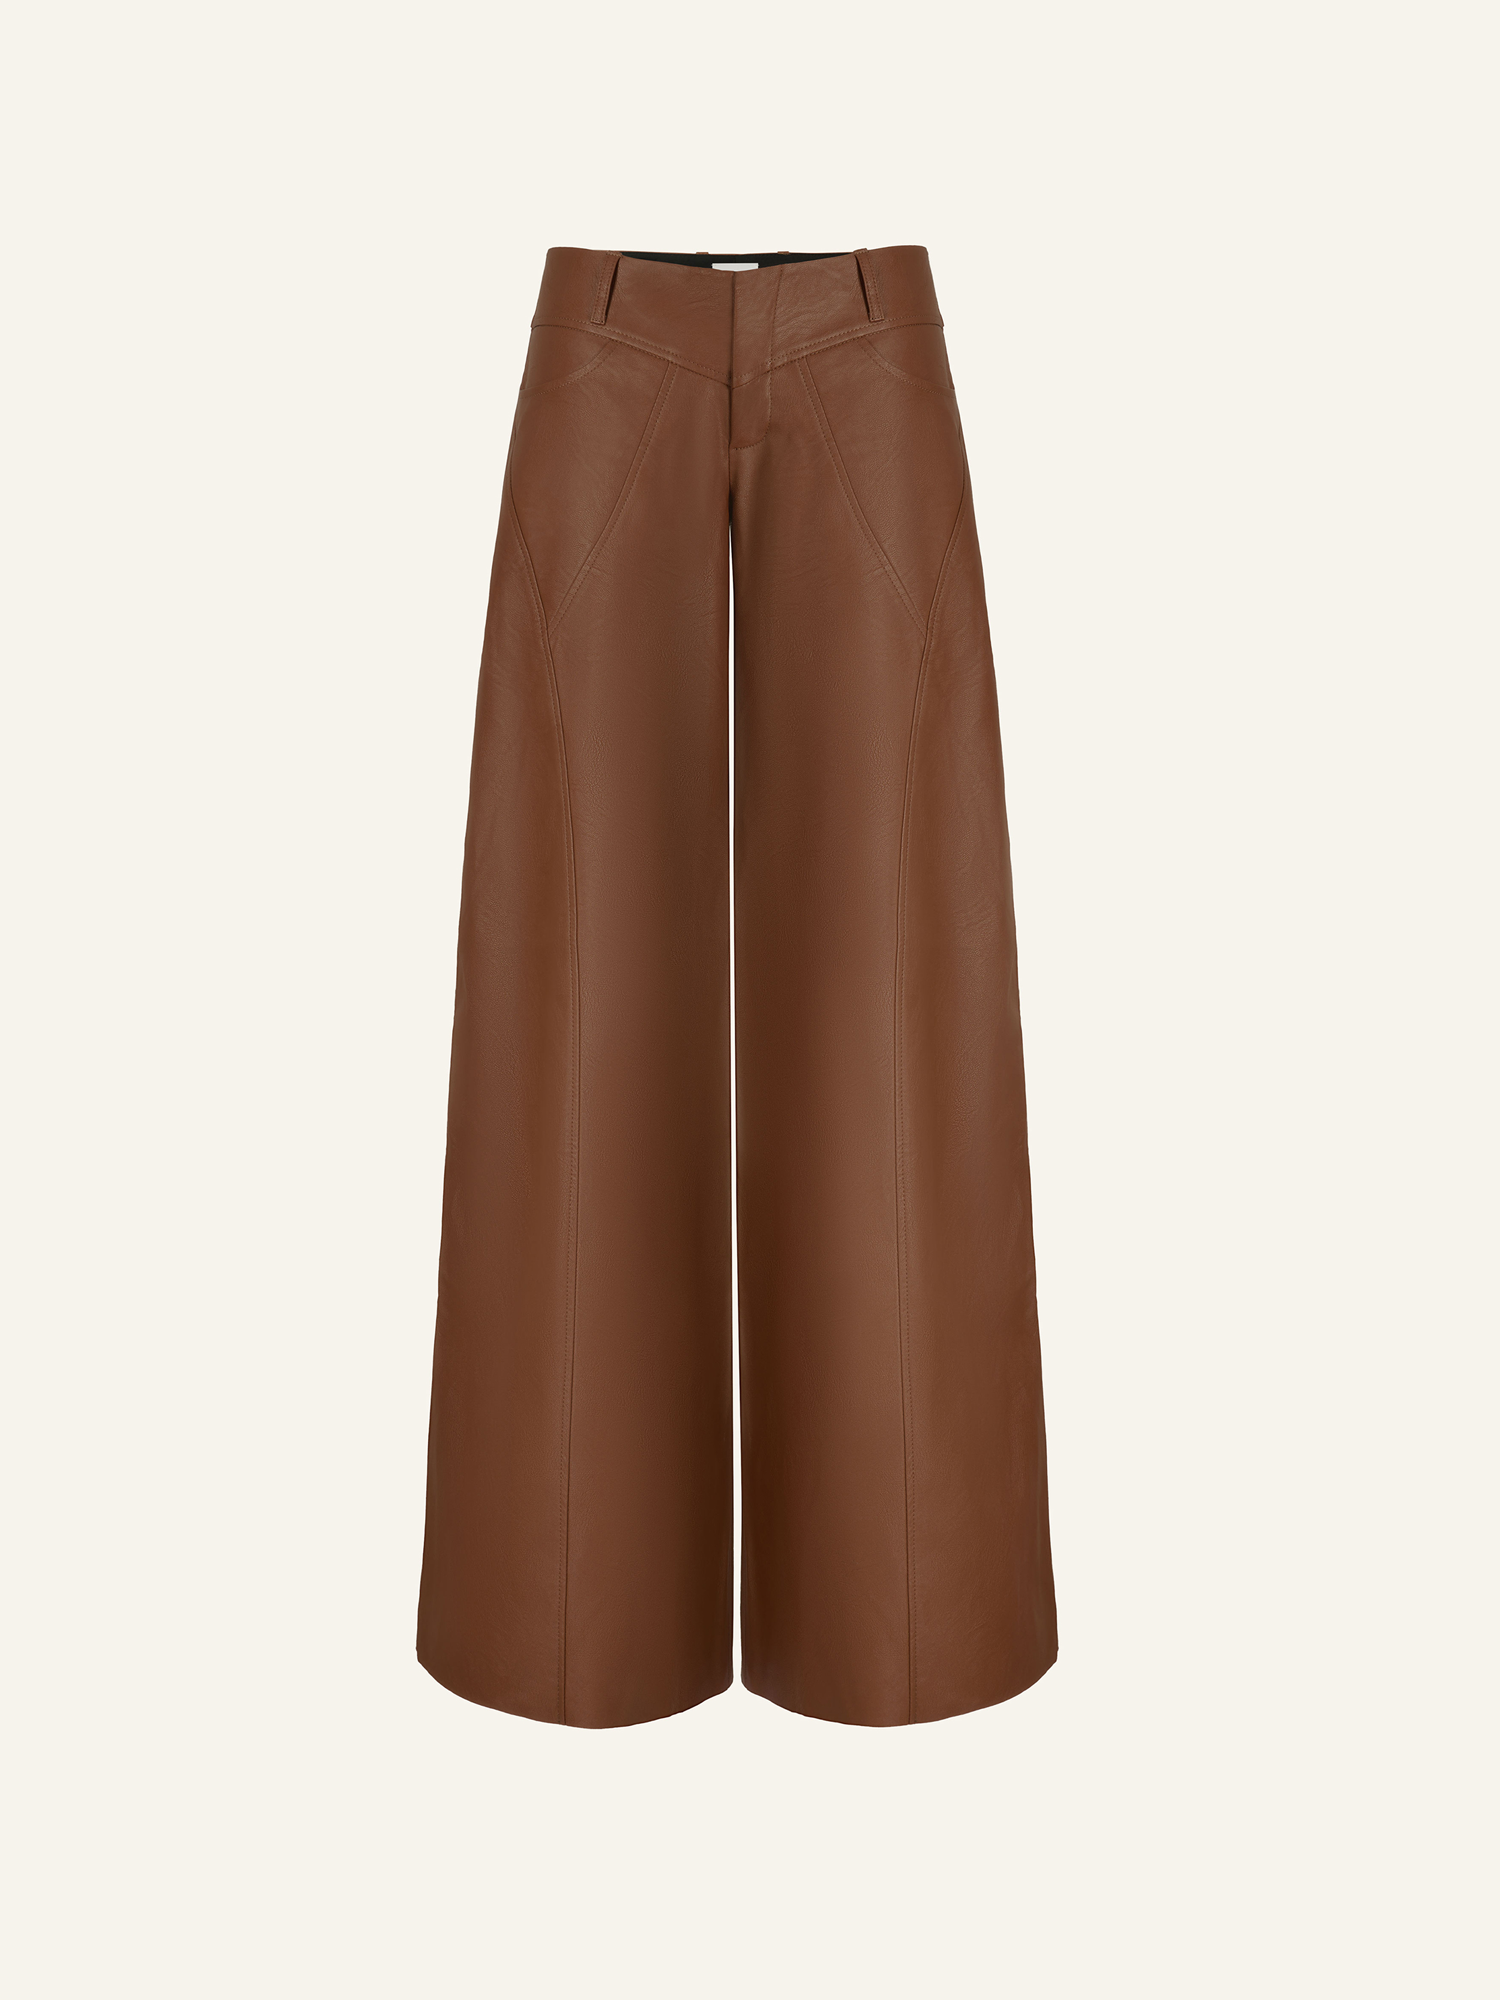 Product photo of brown vegan leather low rise wide leg pants